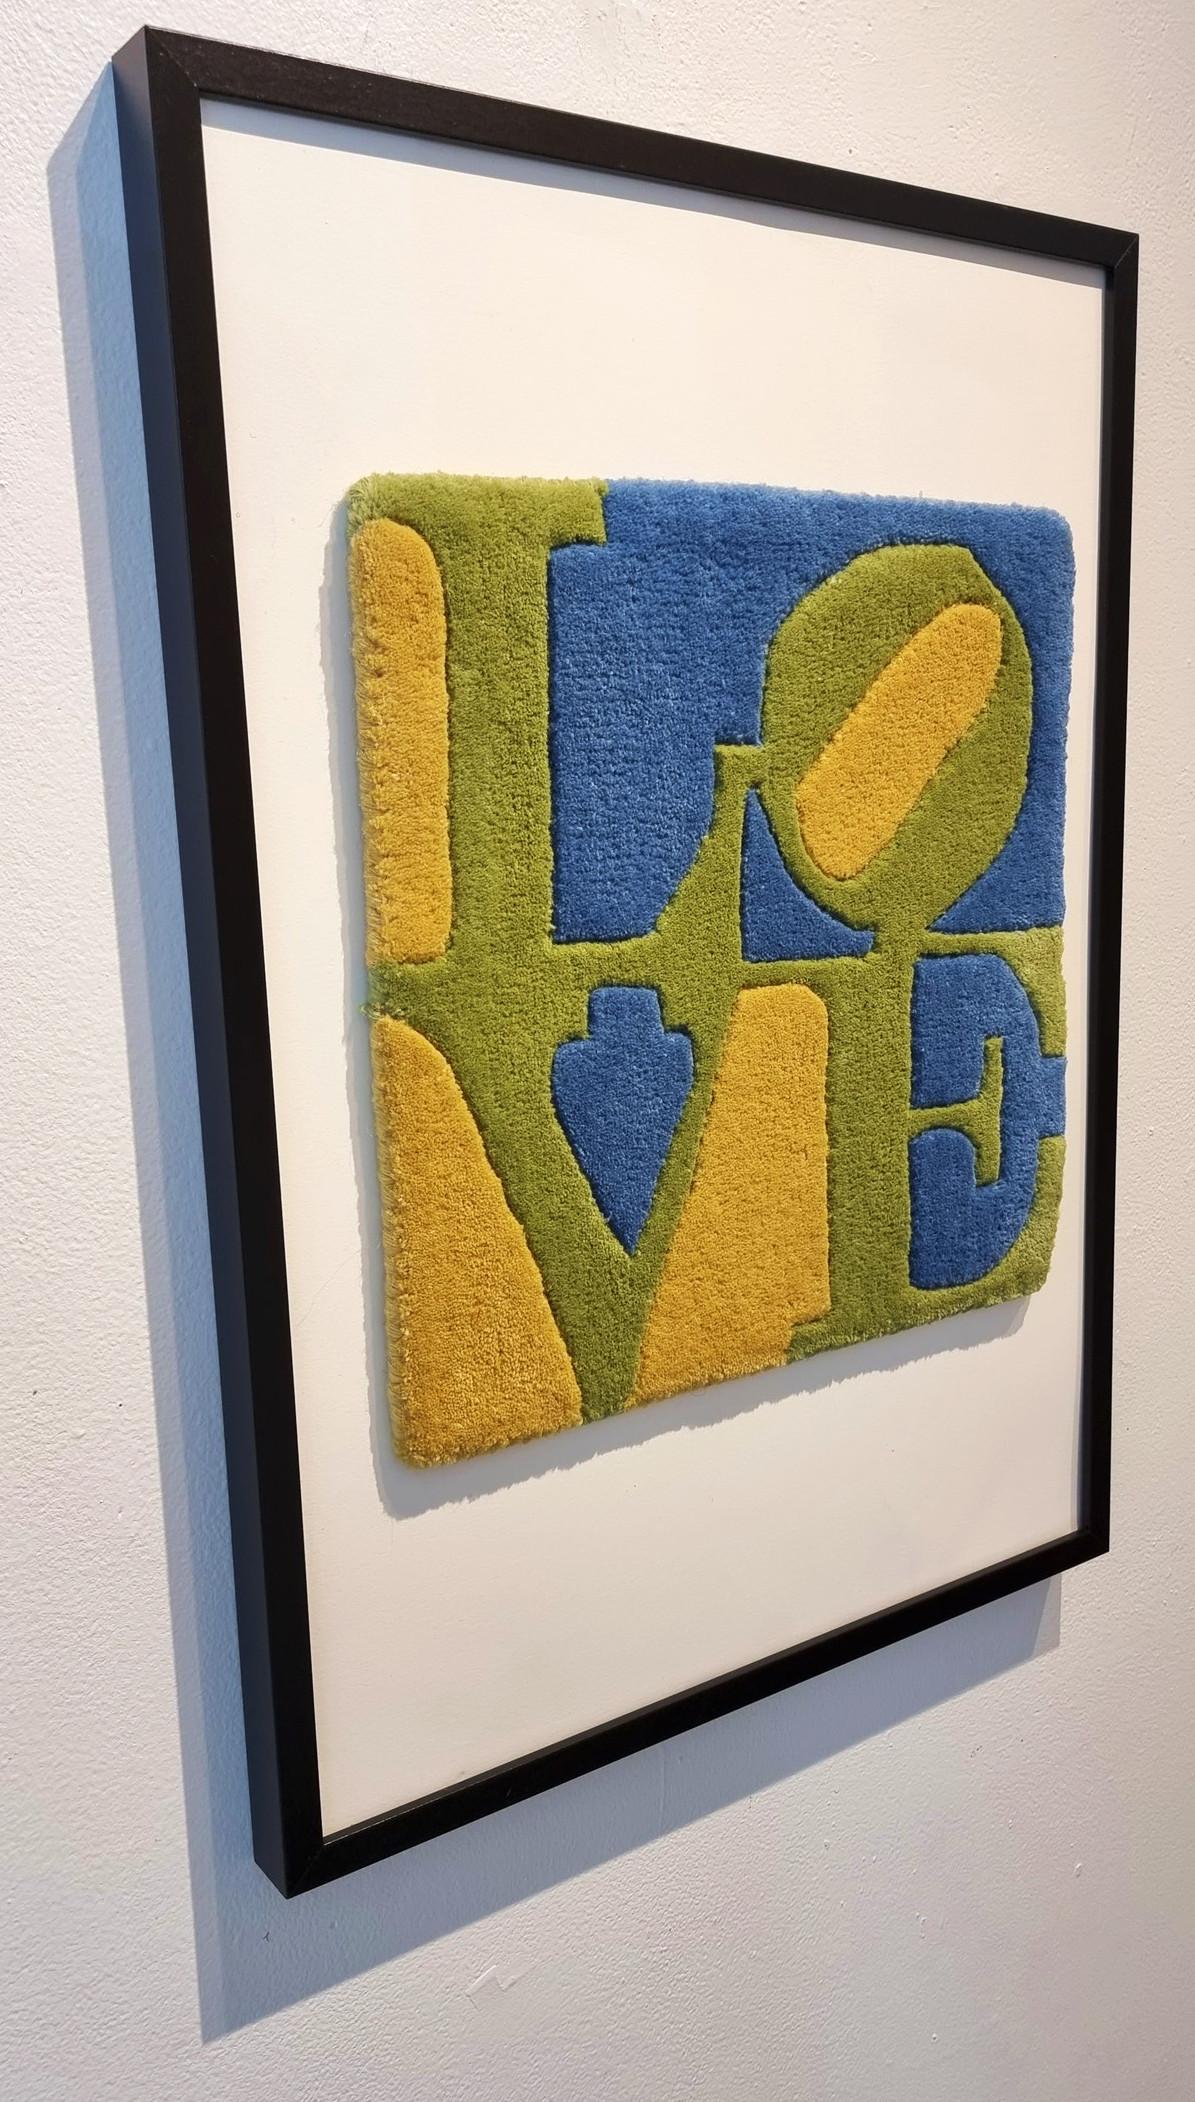 Robert Indiana
Spring LOVE
Multiple wool, handtufed
Year: 2006
Numbered, verso numbered and with COA. With printed signature on the COA.
Size: 14.9 × 14.9 inches
Comes with either black or white wooden frame (28.5 x 20.5 x 1.5 inches)

*Edition